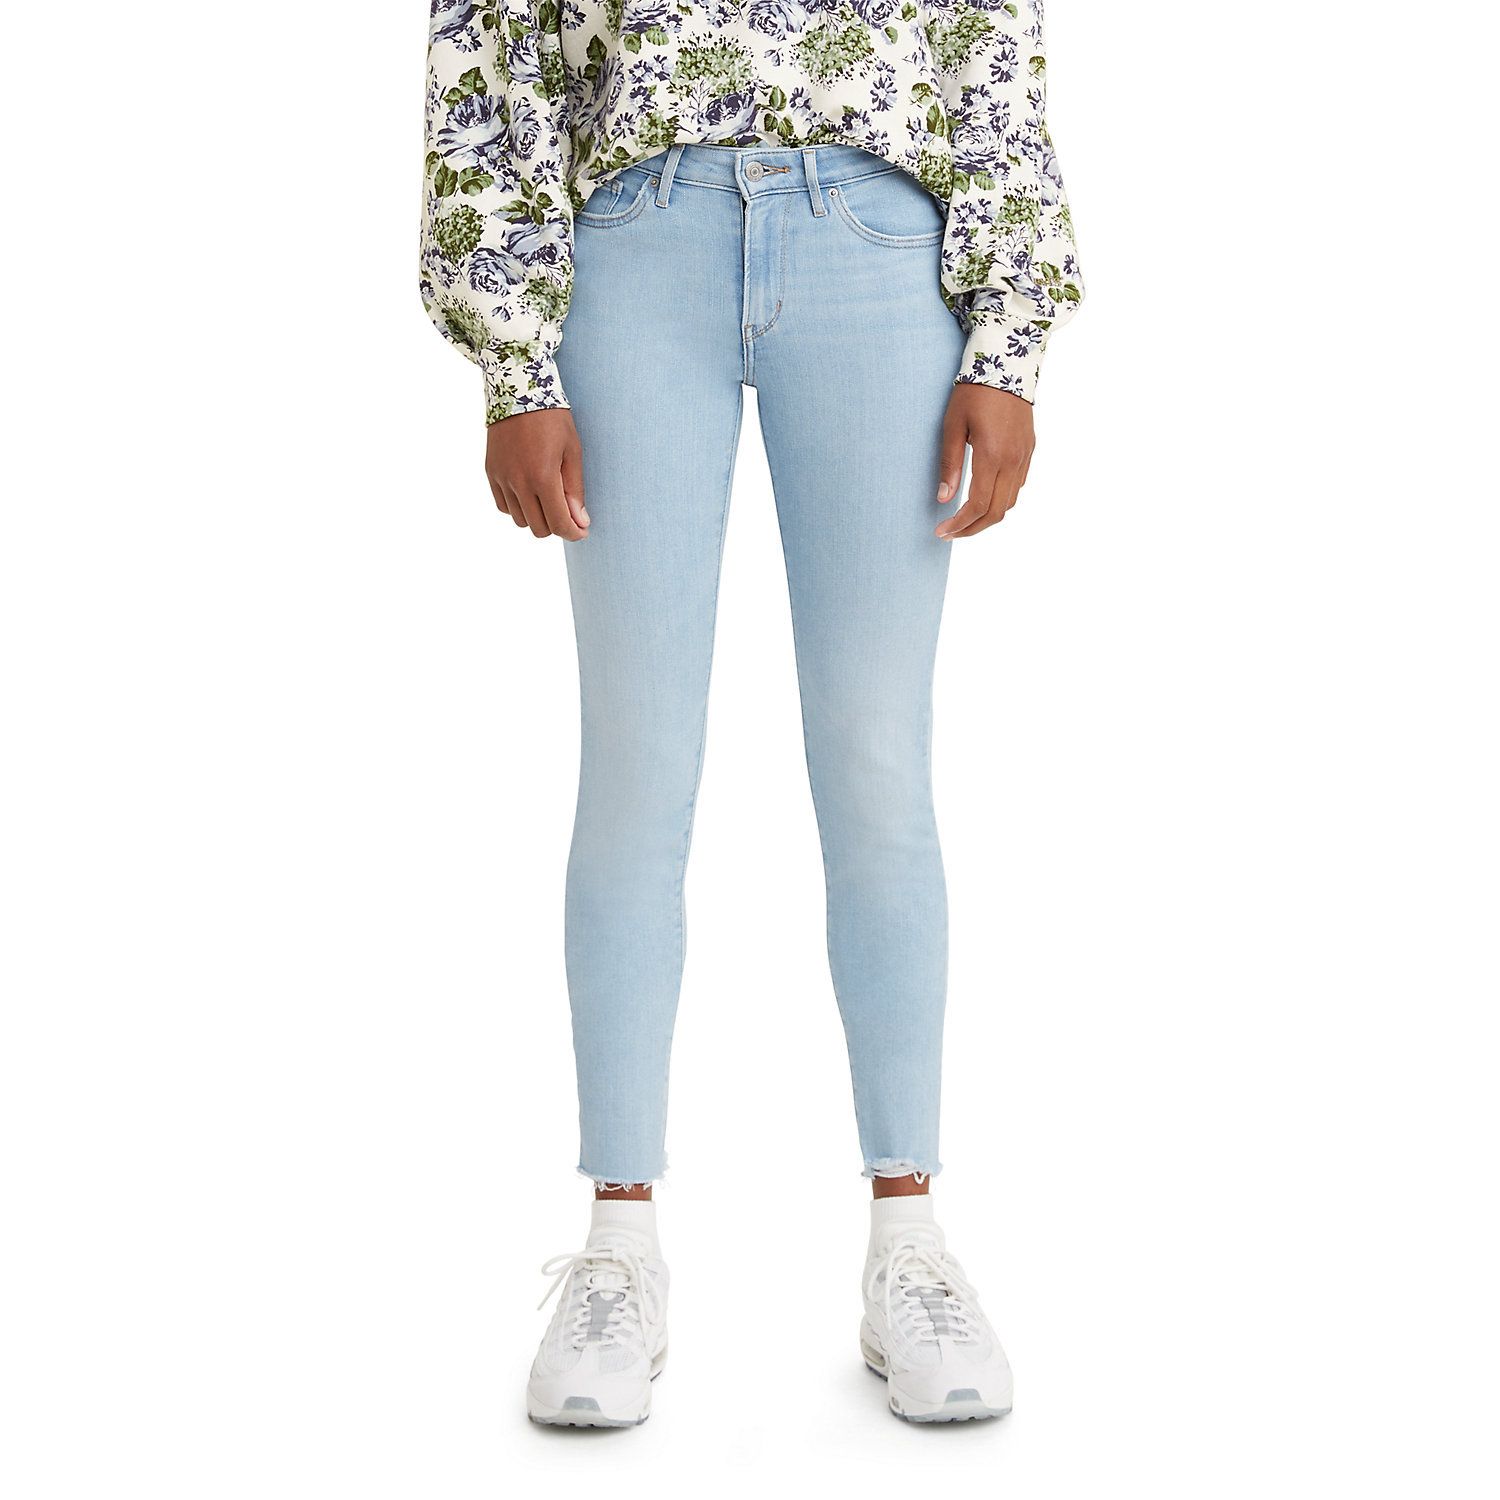 Image for Levi's Women's 711™ Skinny Jeans at Kohl's.